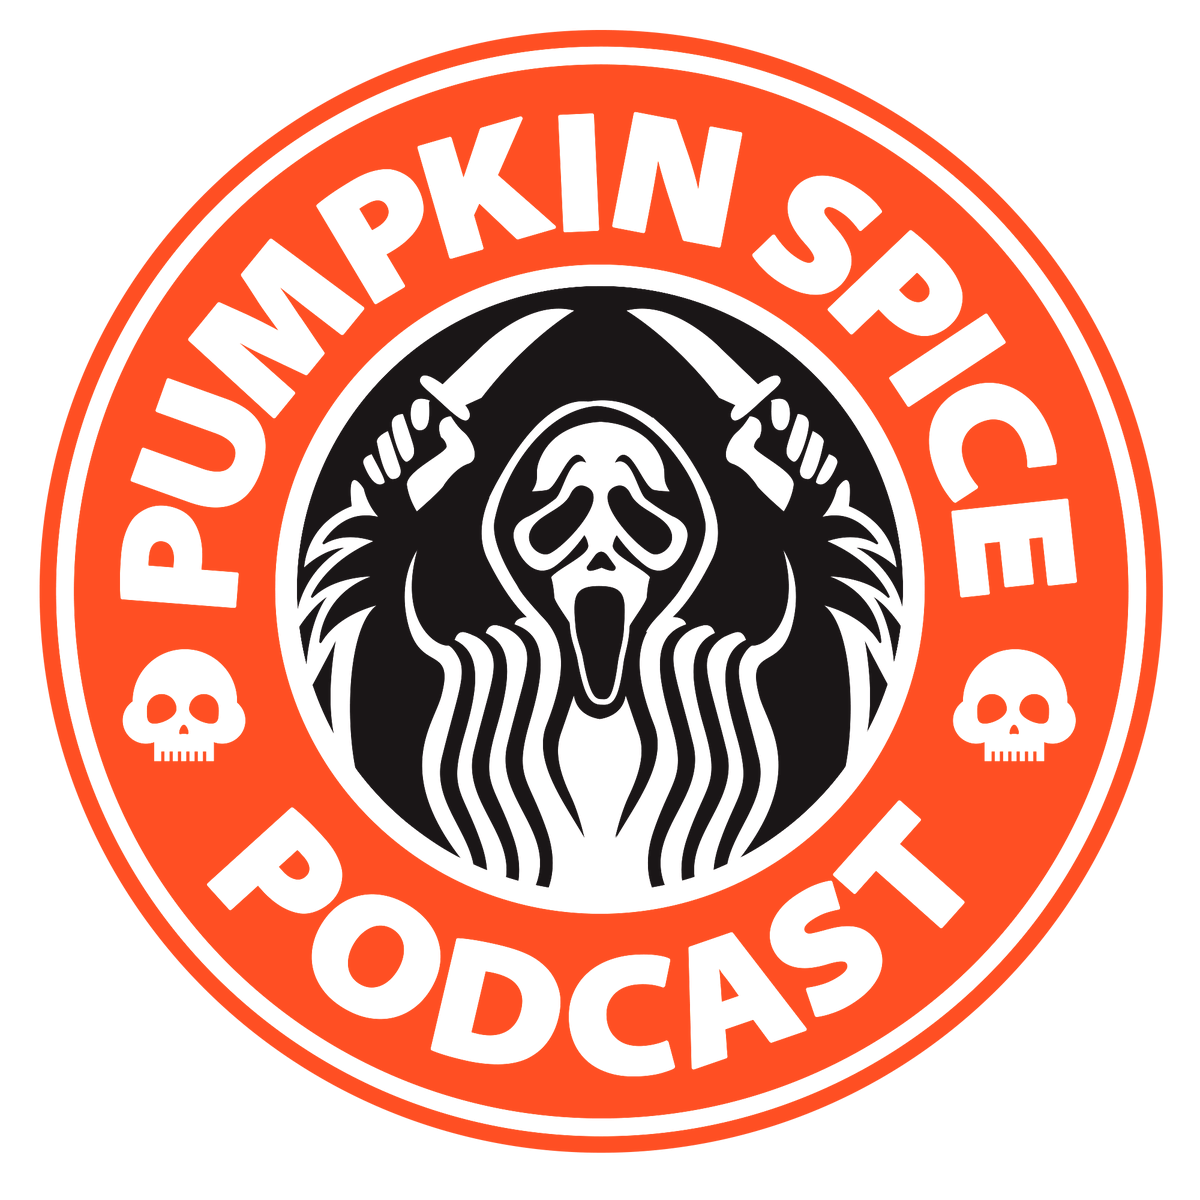 New episodes of  @PumpkinSpicePod start on October 6th. Please subscribe and check them out. Keep making podcasts and having fun. https://anchor.fm/pumpkinspicepodcast